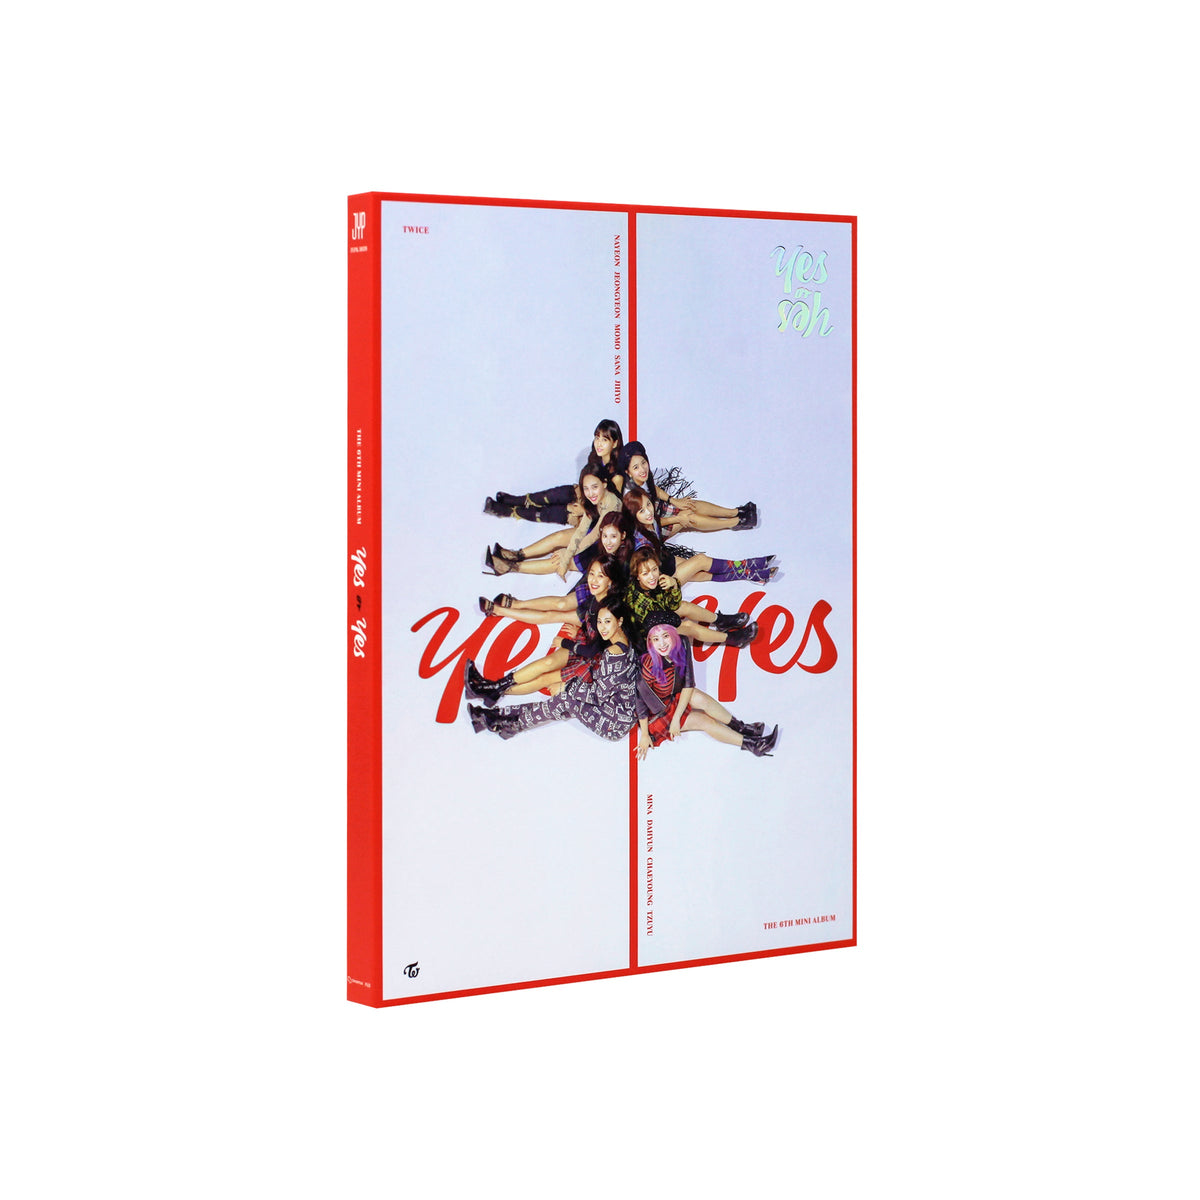 TWICE - YES or YES 6th Mini Album C Ver - main image